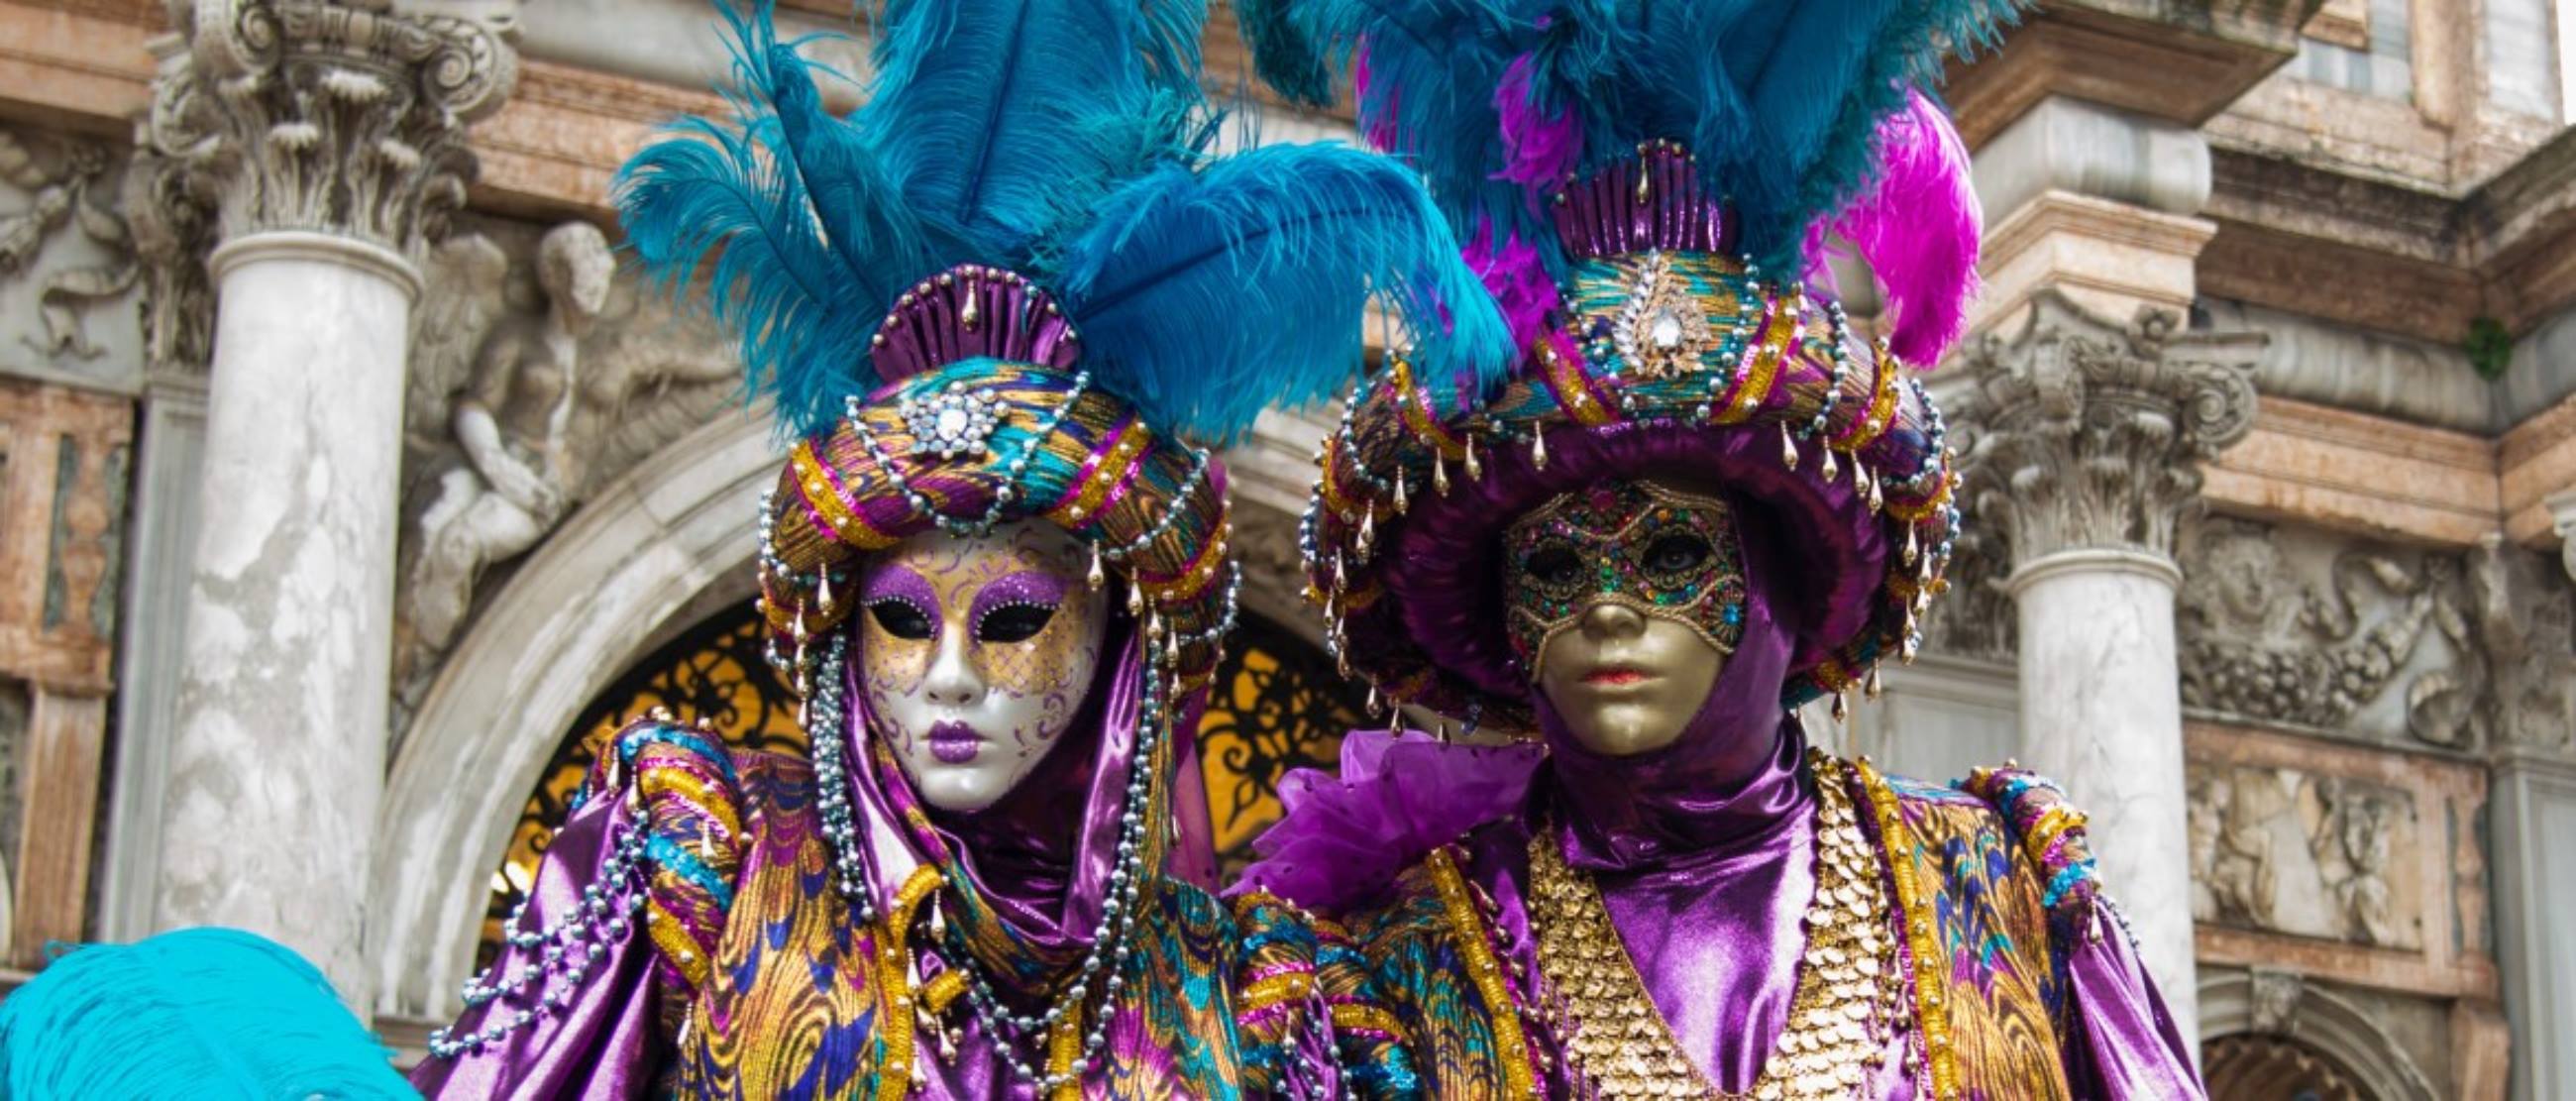 It's-All-About-Fun-At-The-Venice-Carnival